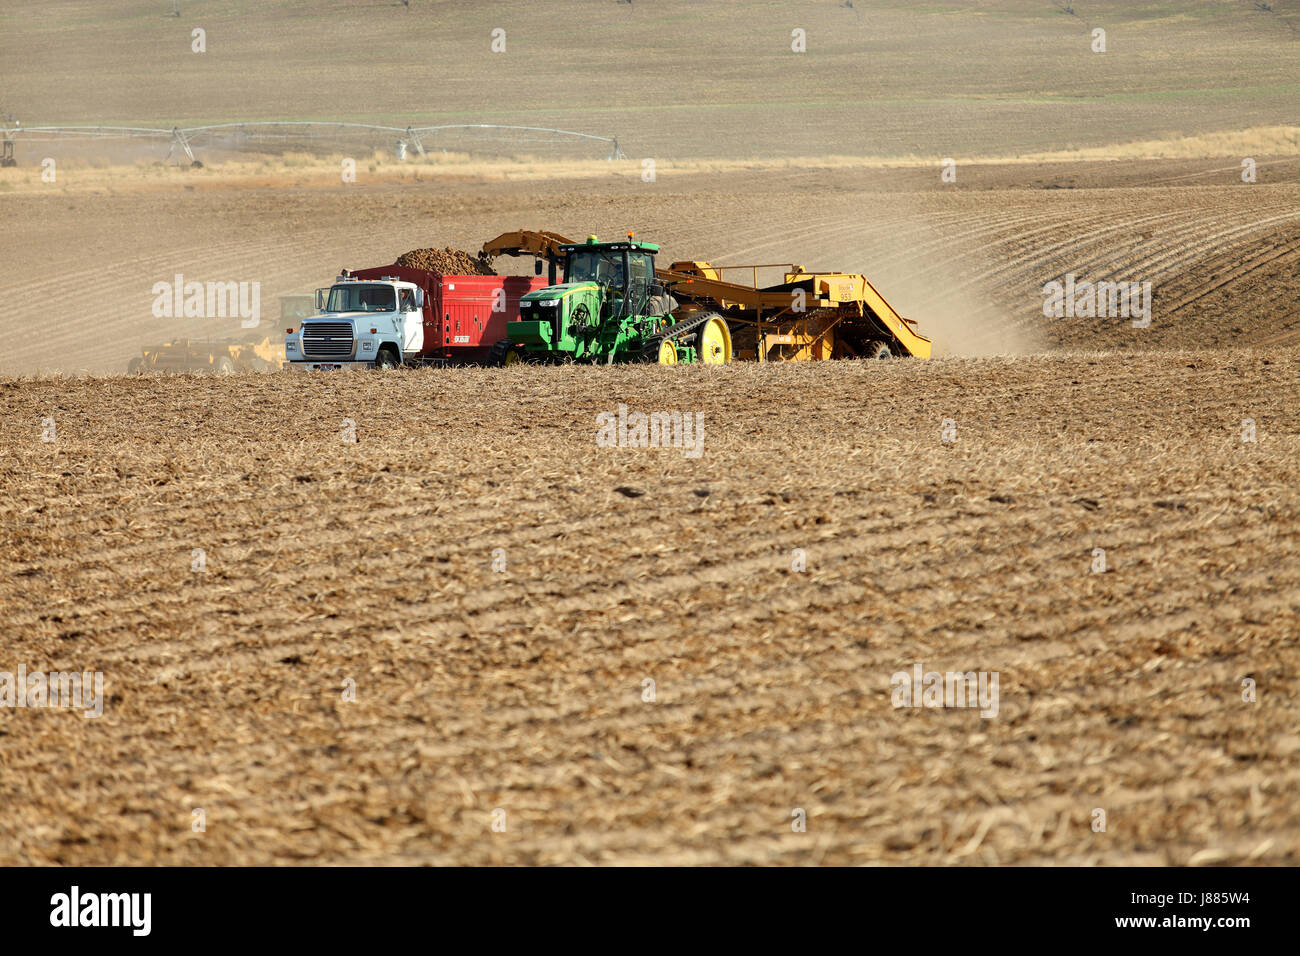 Farmers and field hands use machinery in Idaho farm fields harvesting potatoes. The potatoes are dug and placed gently in a truck for transport Stock Photo